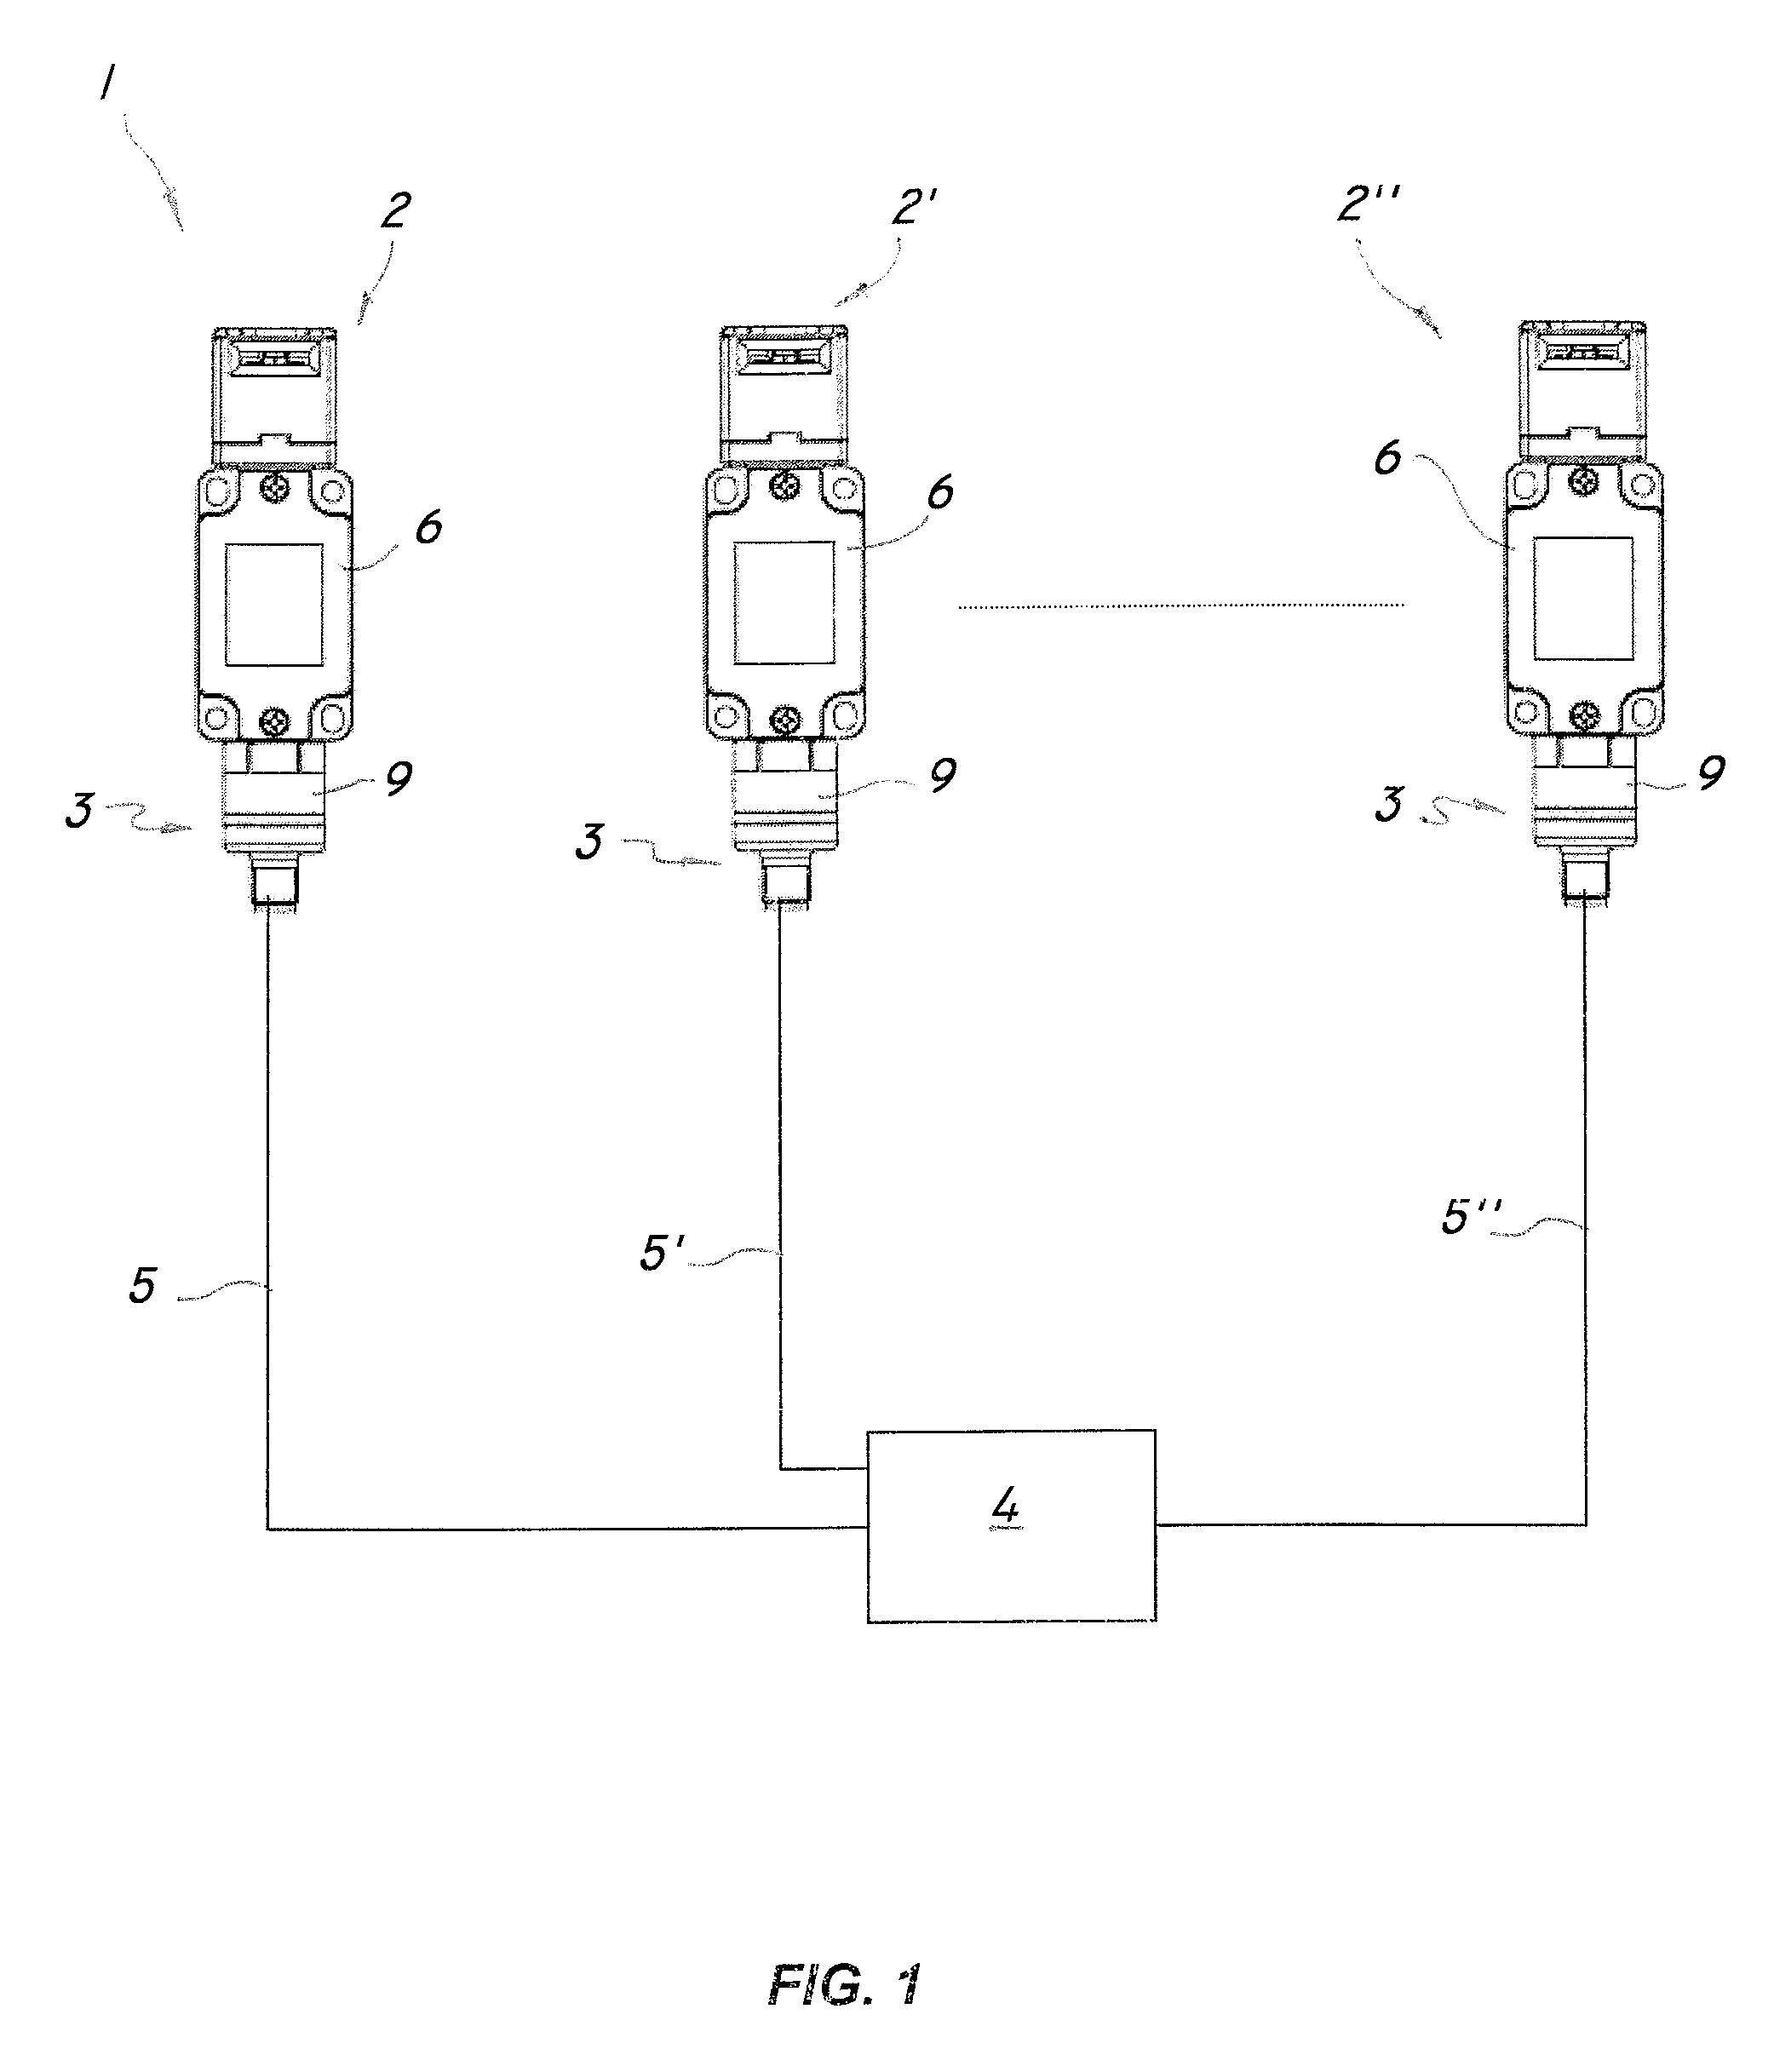 Adapter for connecting a switch device to a data bus and switch assembly comprising the adapter